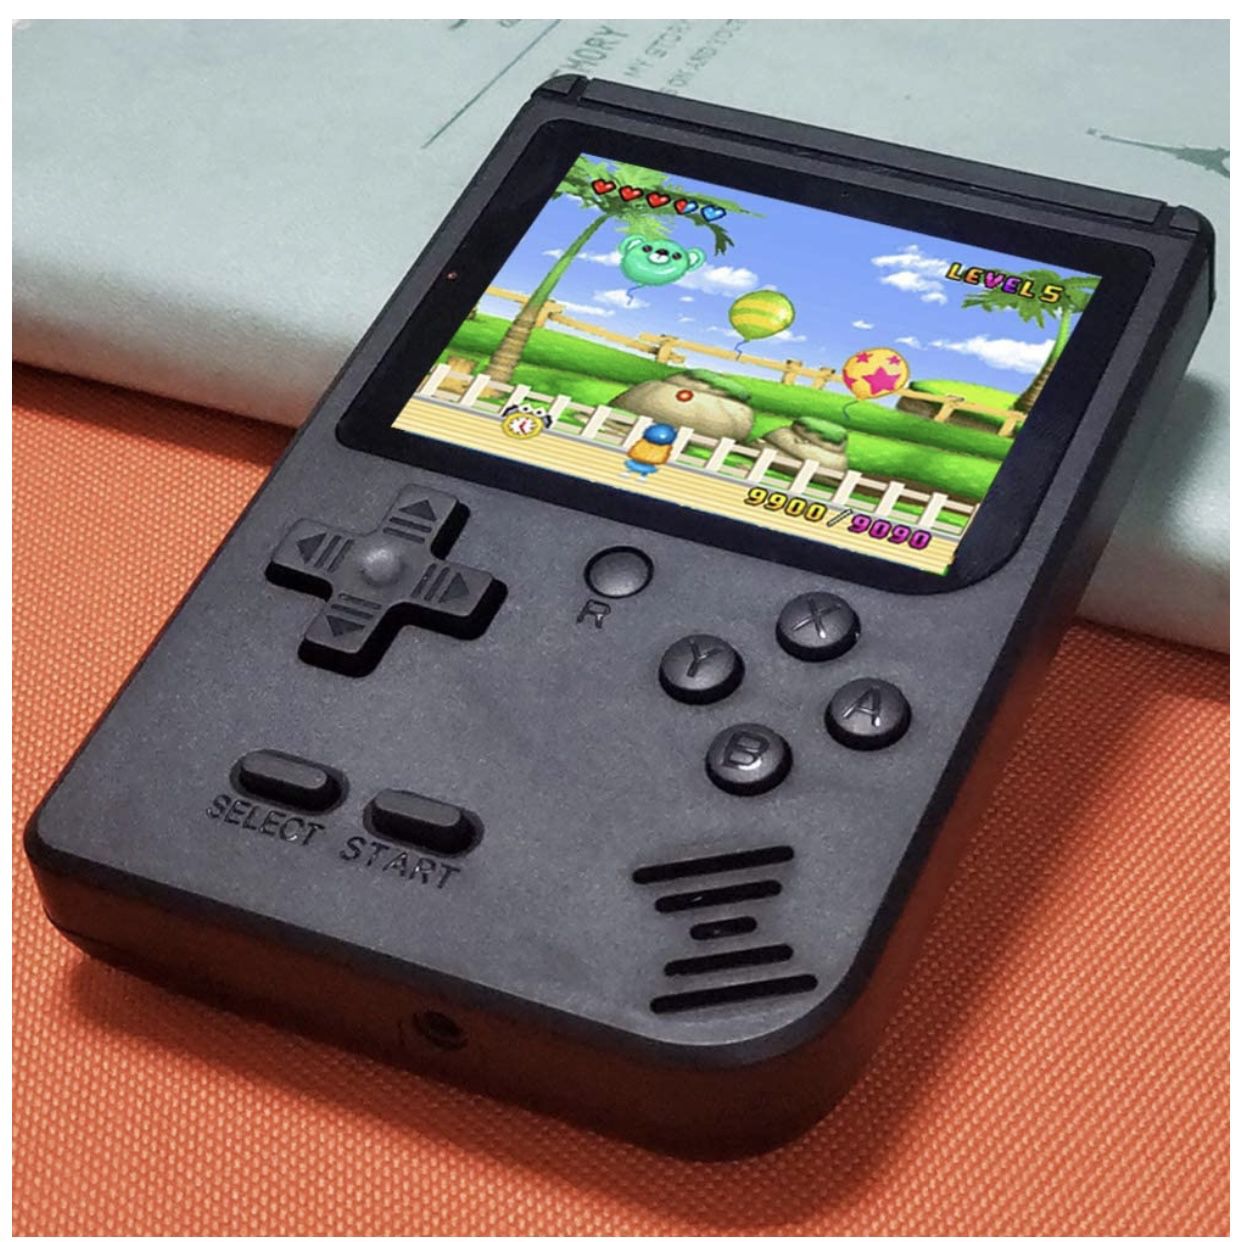 Handheld Games Console for Kids, Retro FC Arcade Video Gaming System Built-in 400 Classic Old School Games